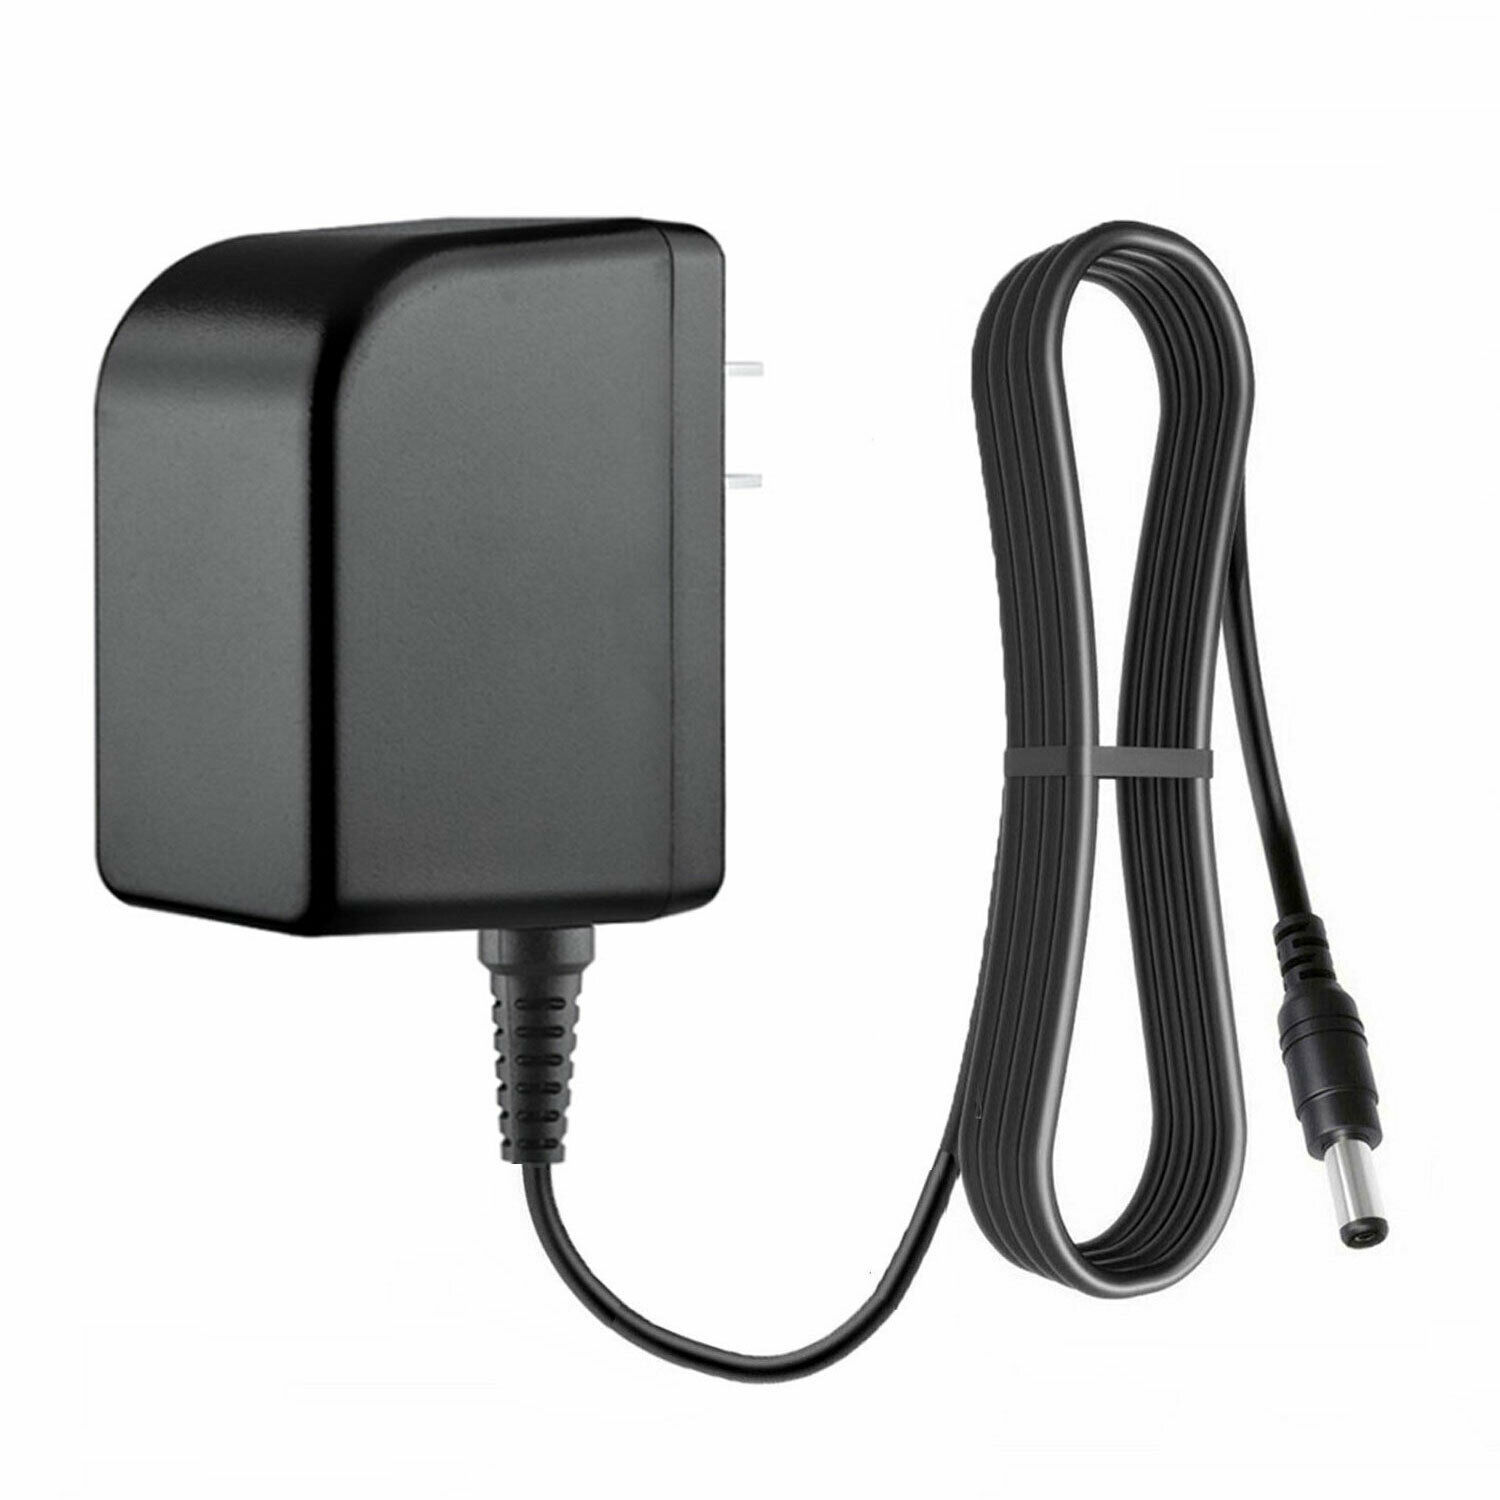 AC Power Adapter For Coming Data CP0540 5v 4a 20w charger 3.5mm/1.3mm PSU Type: AC to DC Power Coming Data Does n - Click Image to Close